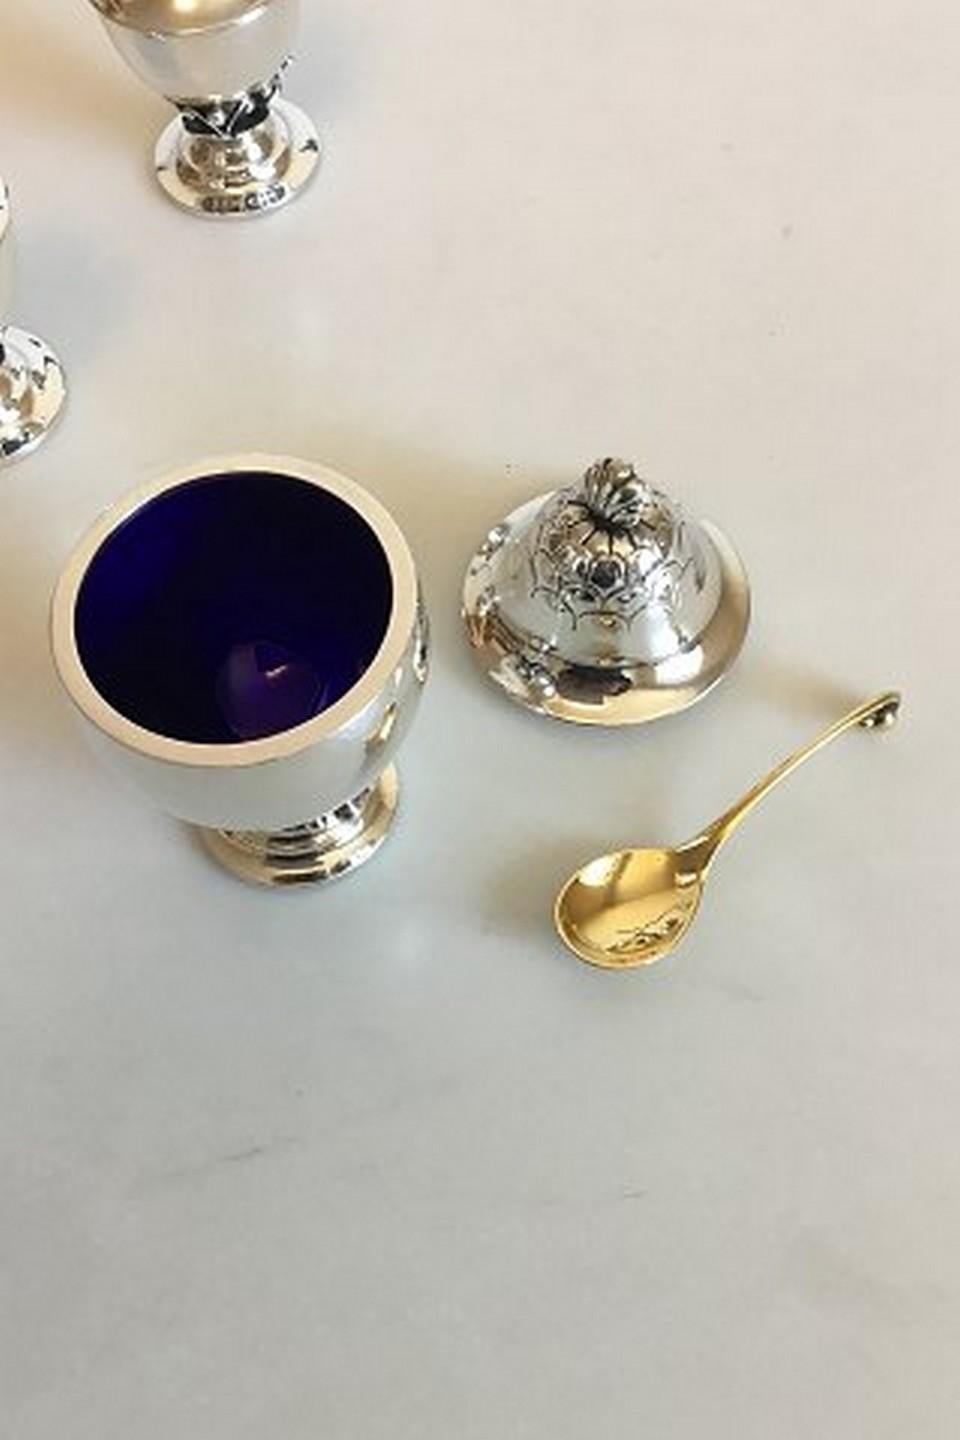 Georg Jensen sterling silver salt and pepper shakers and mustard jar with gilded spoon No 235.
Measures salt and pepper: 7.2 cm / 2 53/64 in. Mustard: 9 cm / 3 35/64 in. Weighs combined 185 g / 6.55 oz.
Item no.: 374215.
  